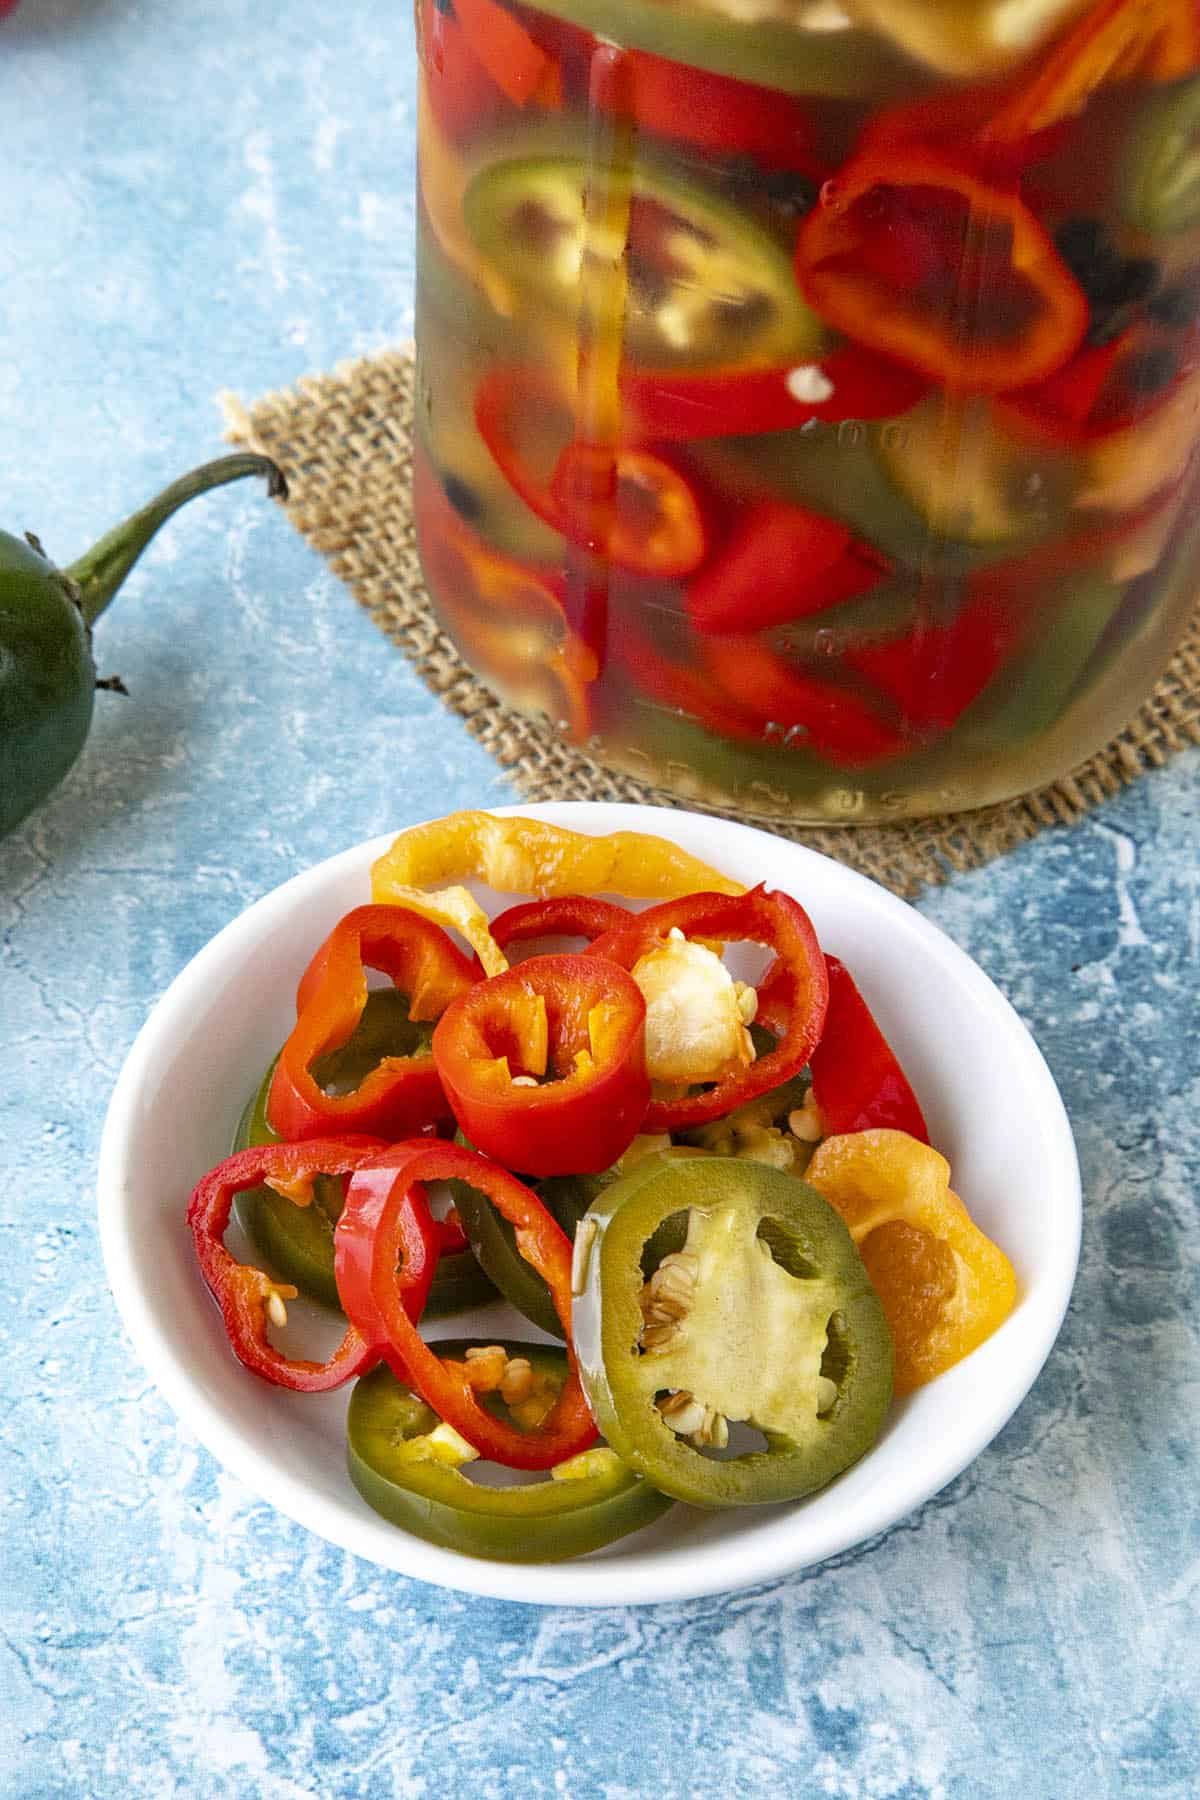 How to Pickle Chili Peppers - a Recipe Guide